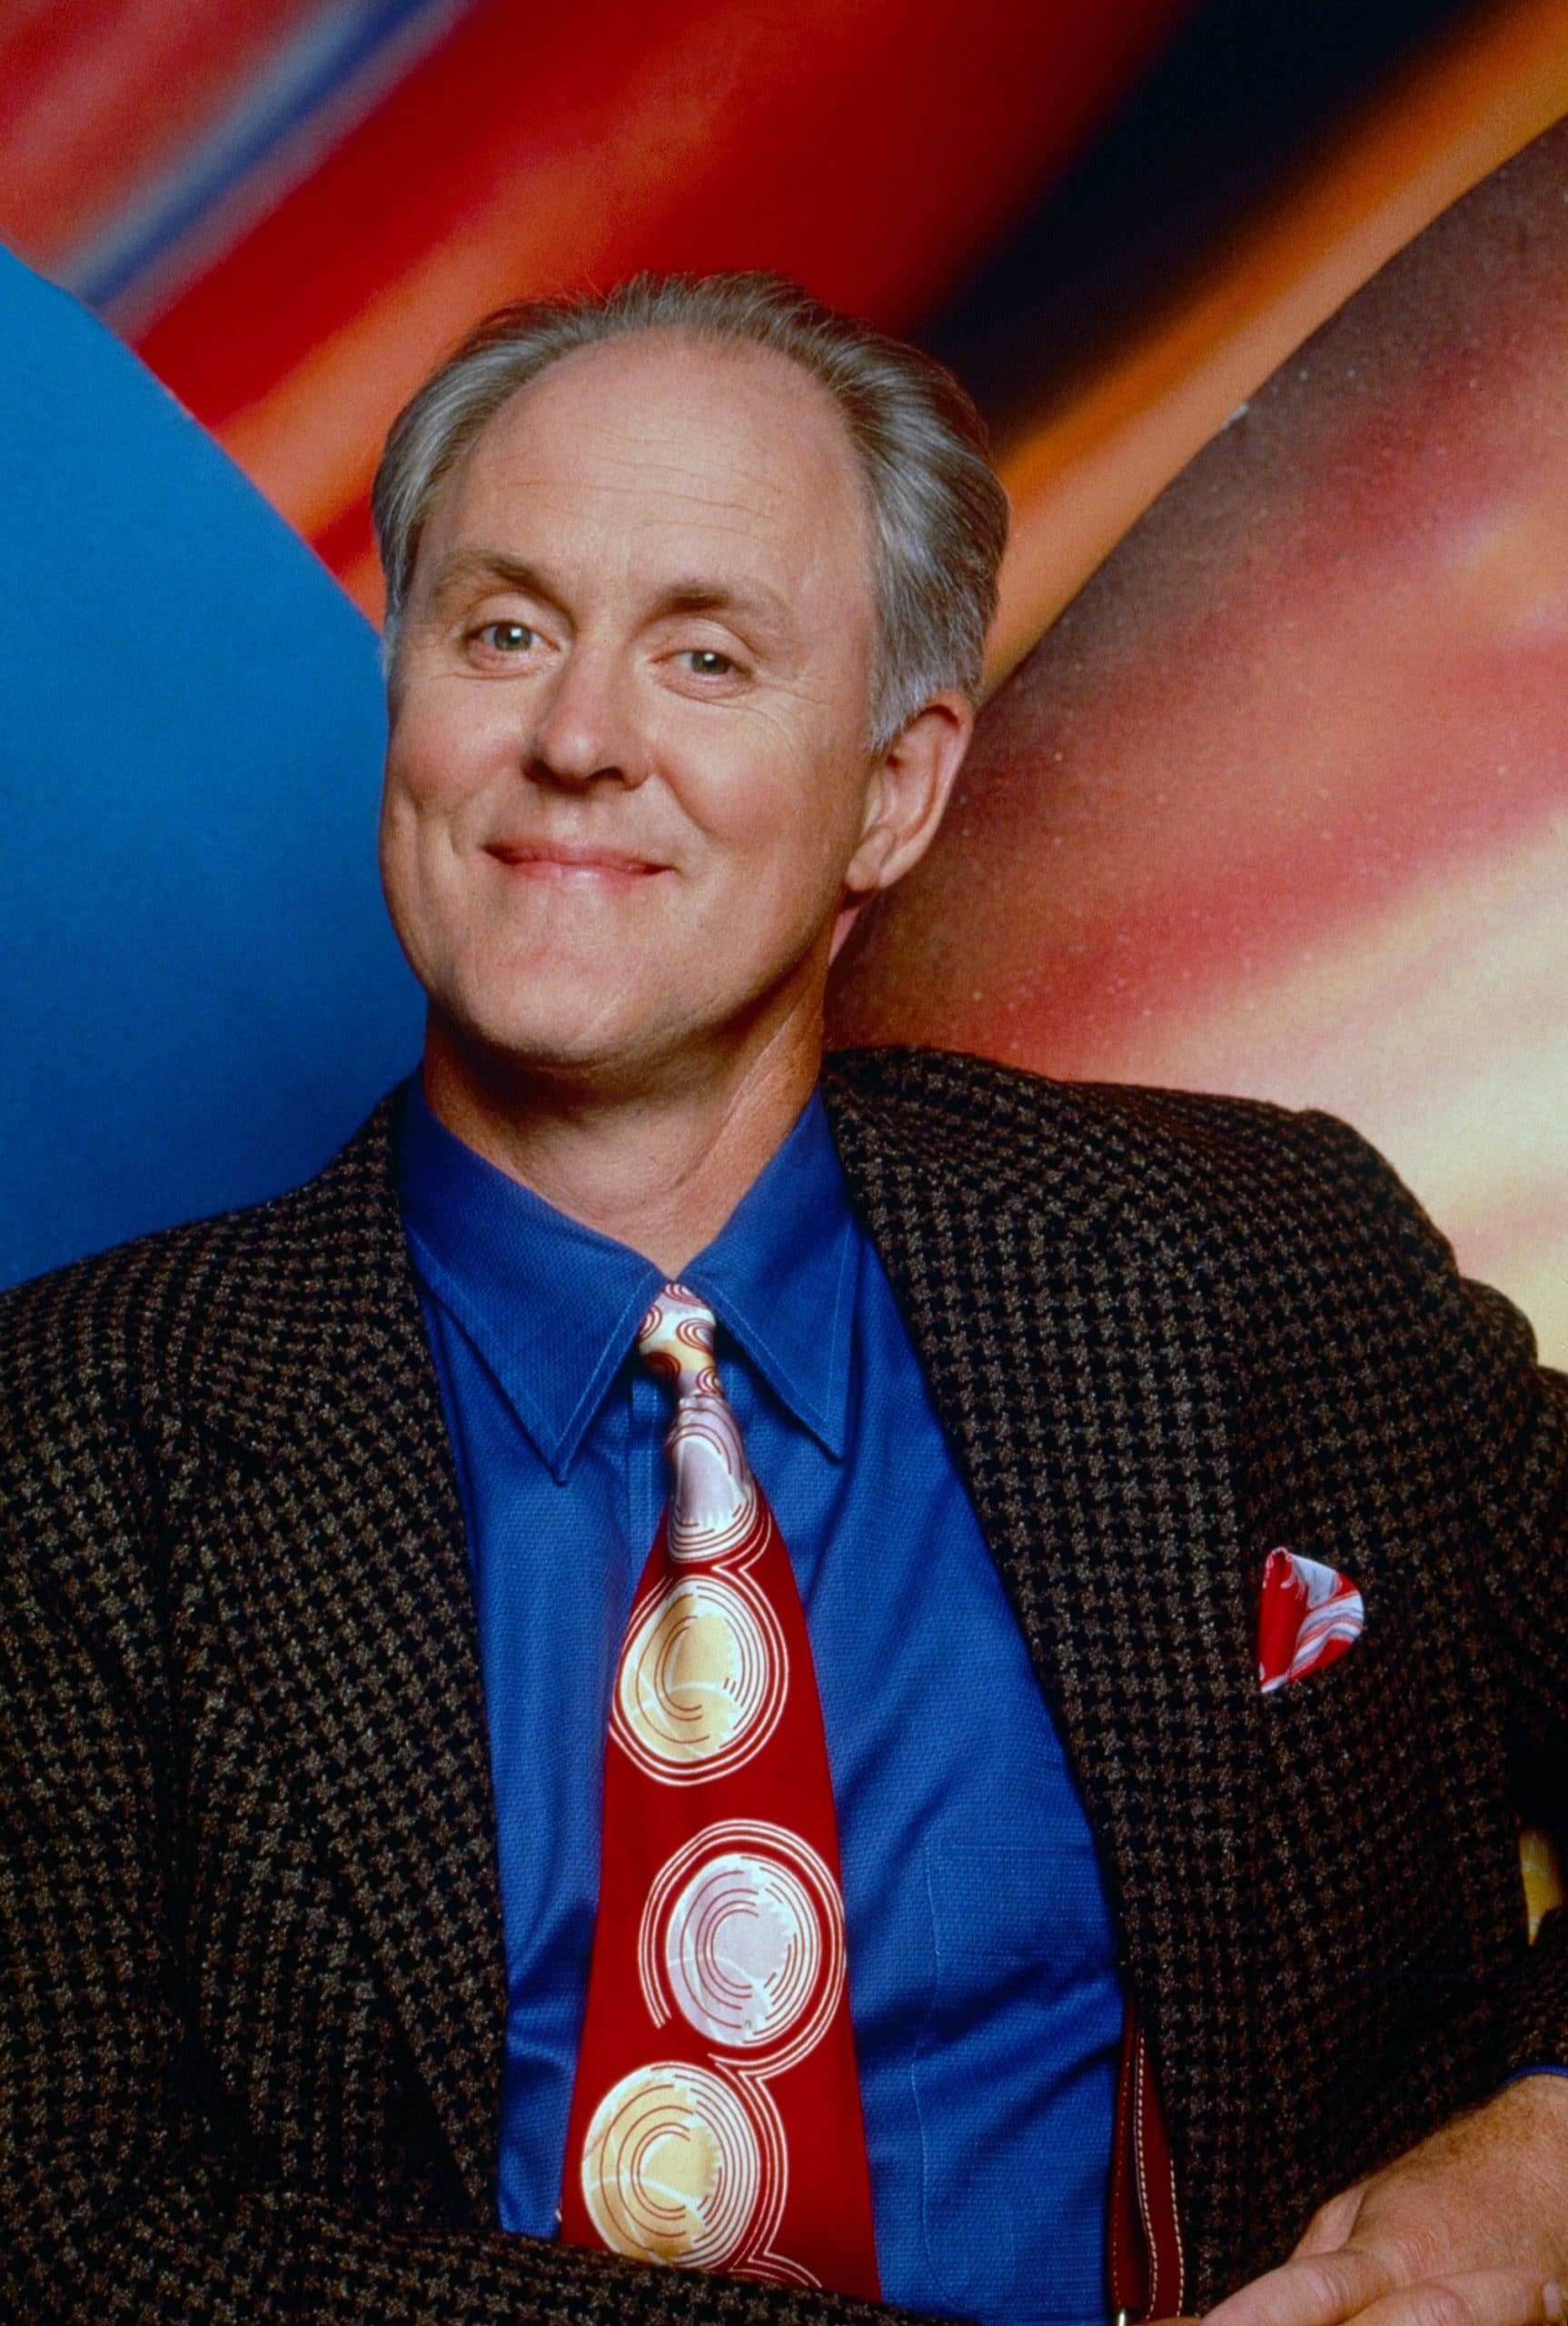 3RD ROCK FROM THE SUN, John Lithgow, 1996-2001